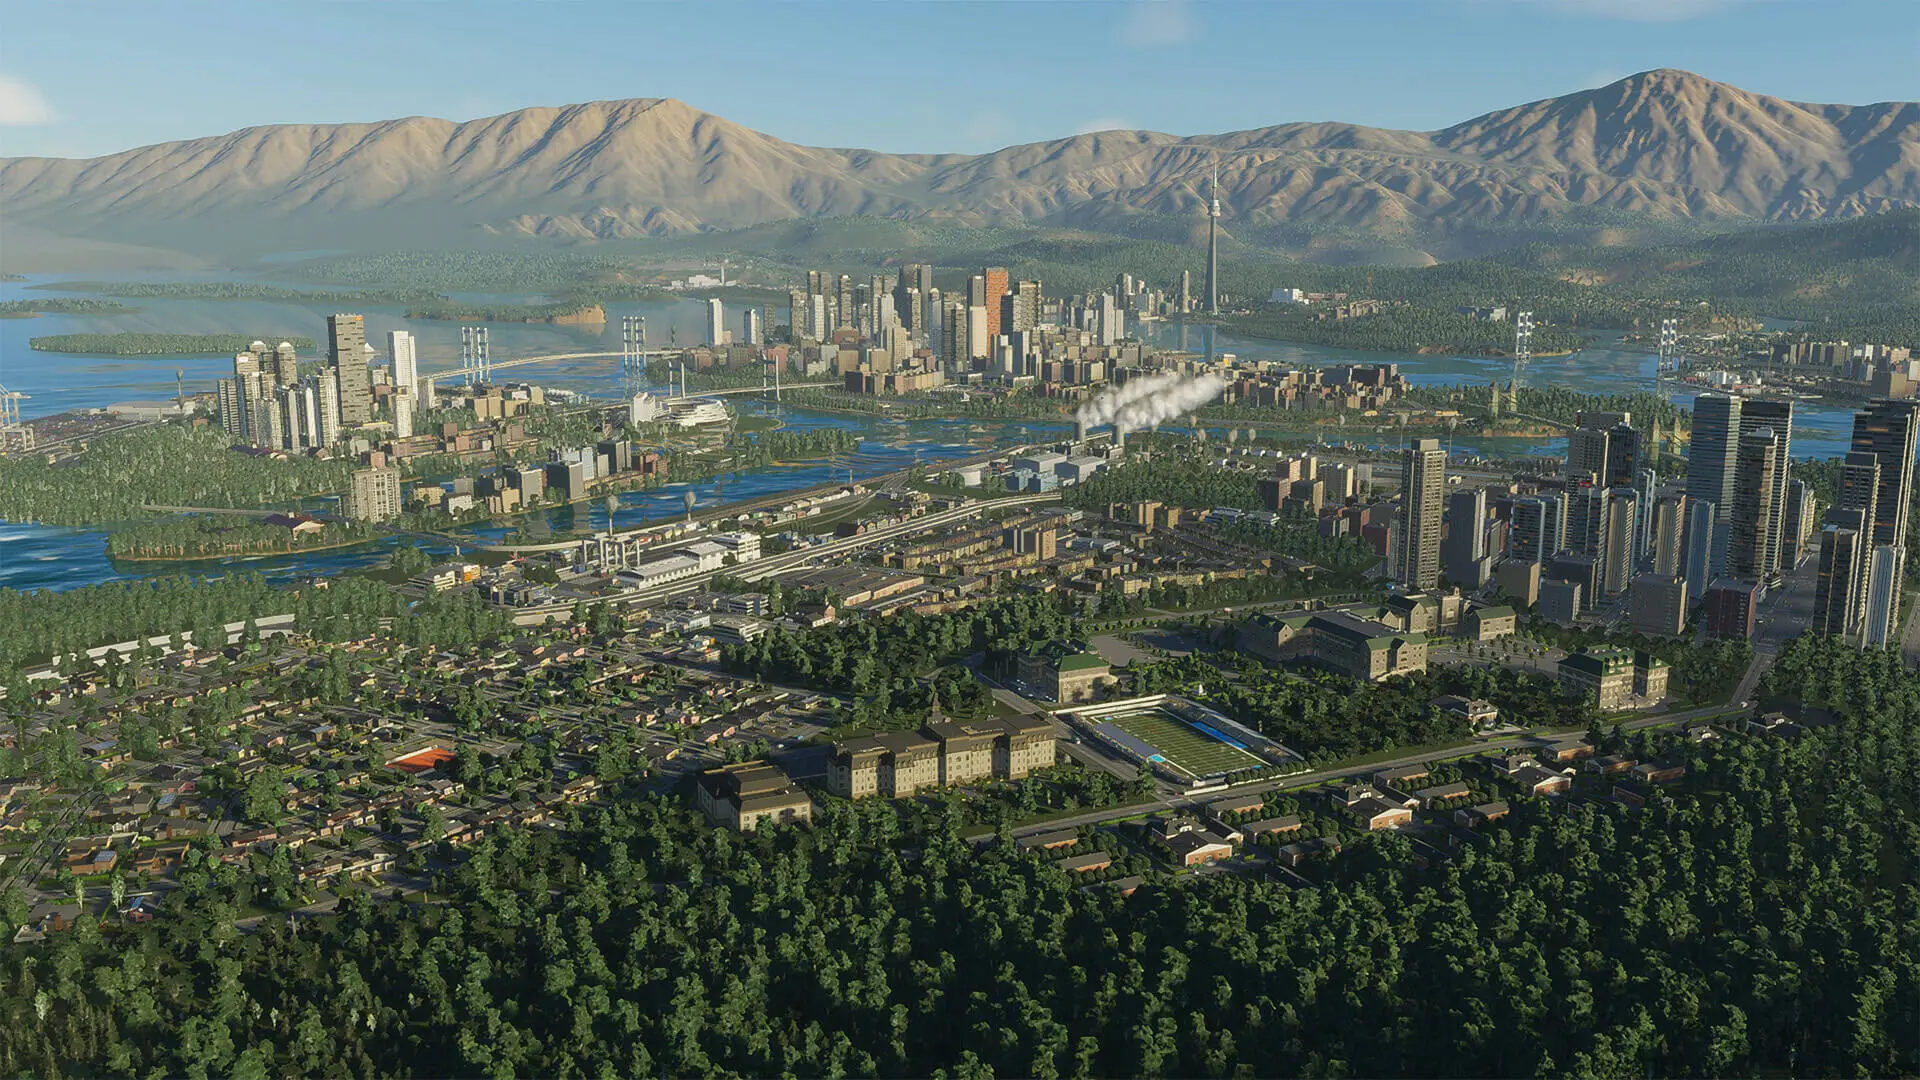 Cities Skylines 2 runs with 20fps on an NVIDIA RTX4090 at 4K/High